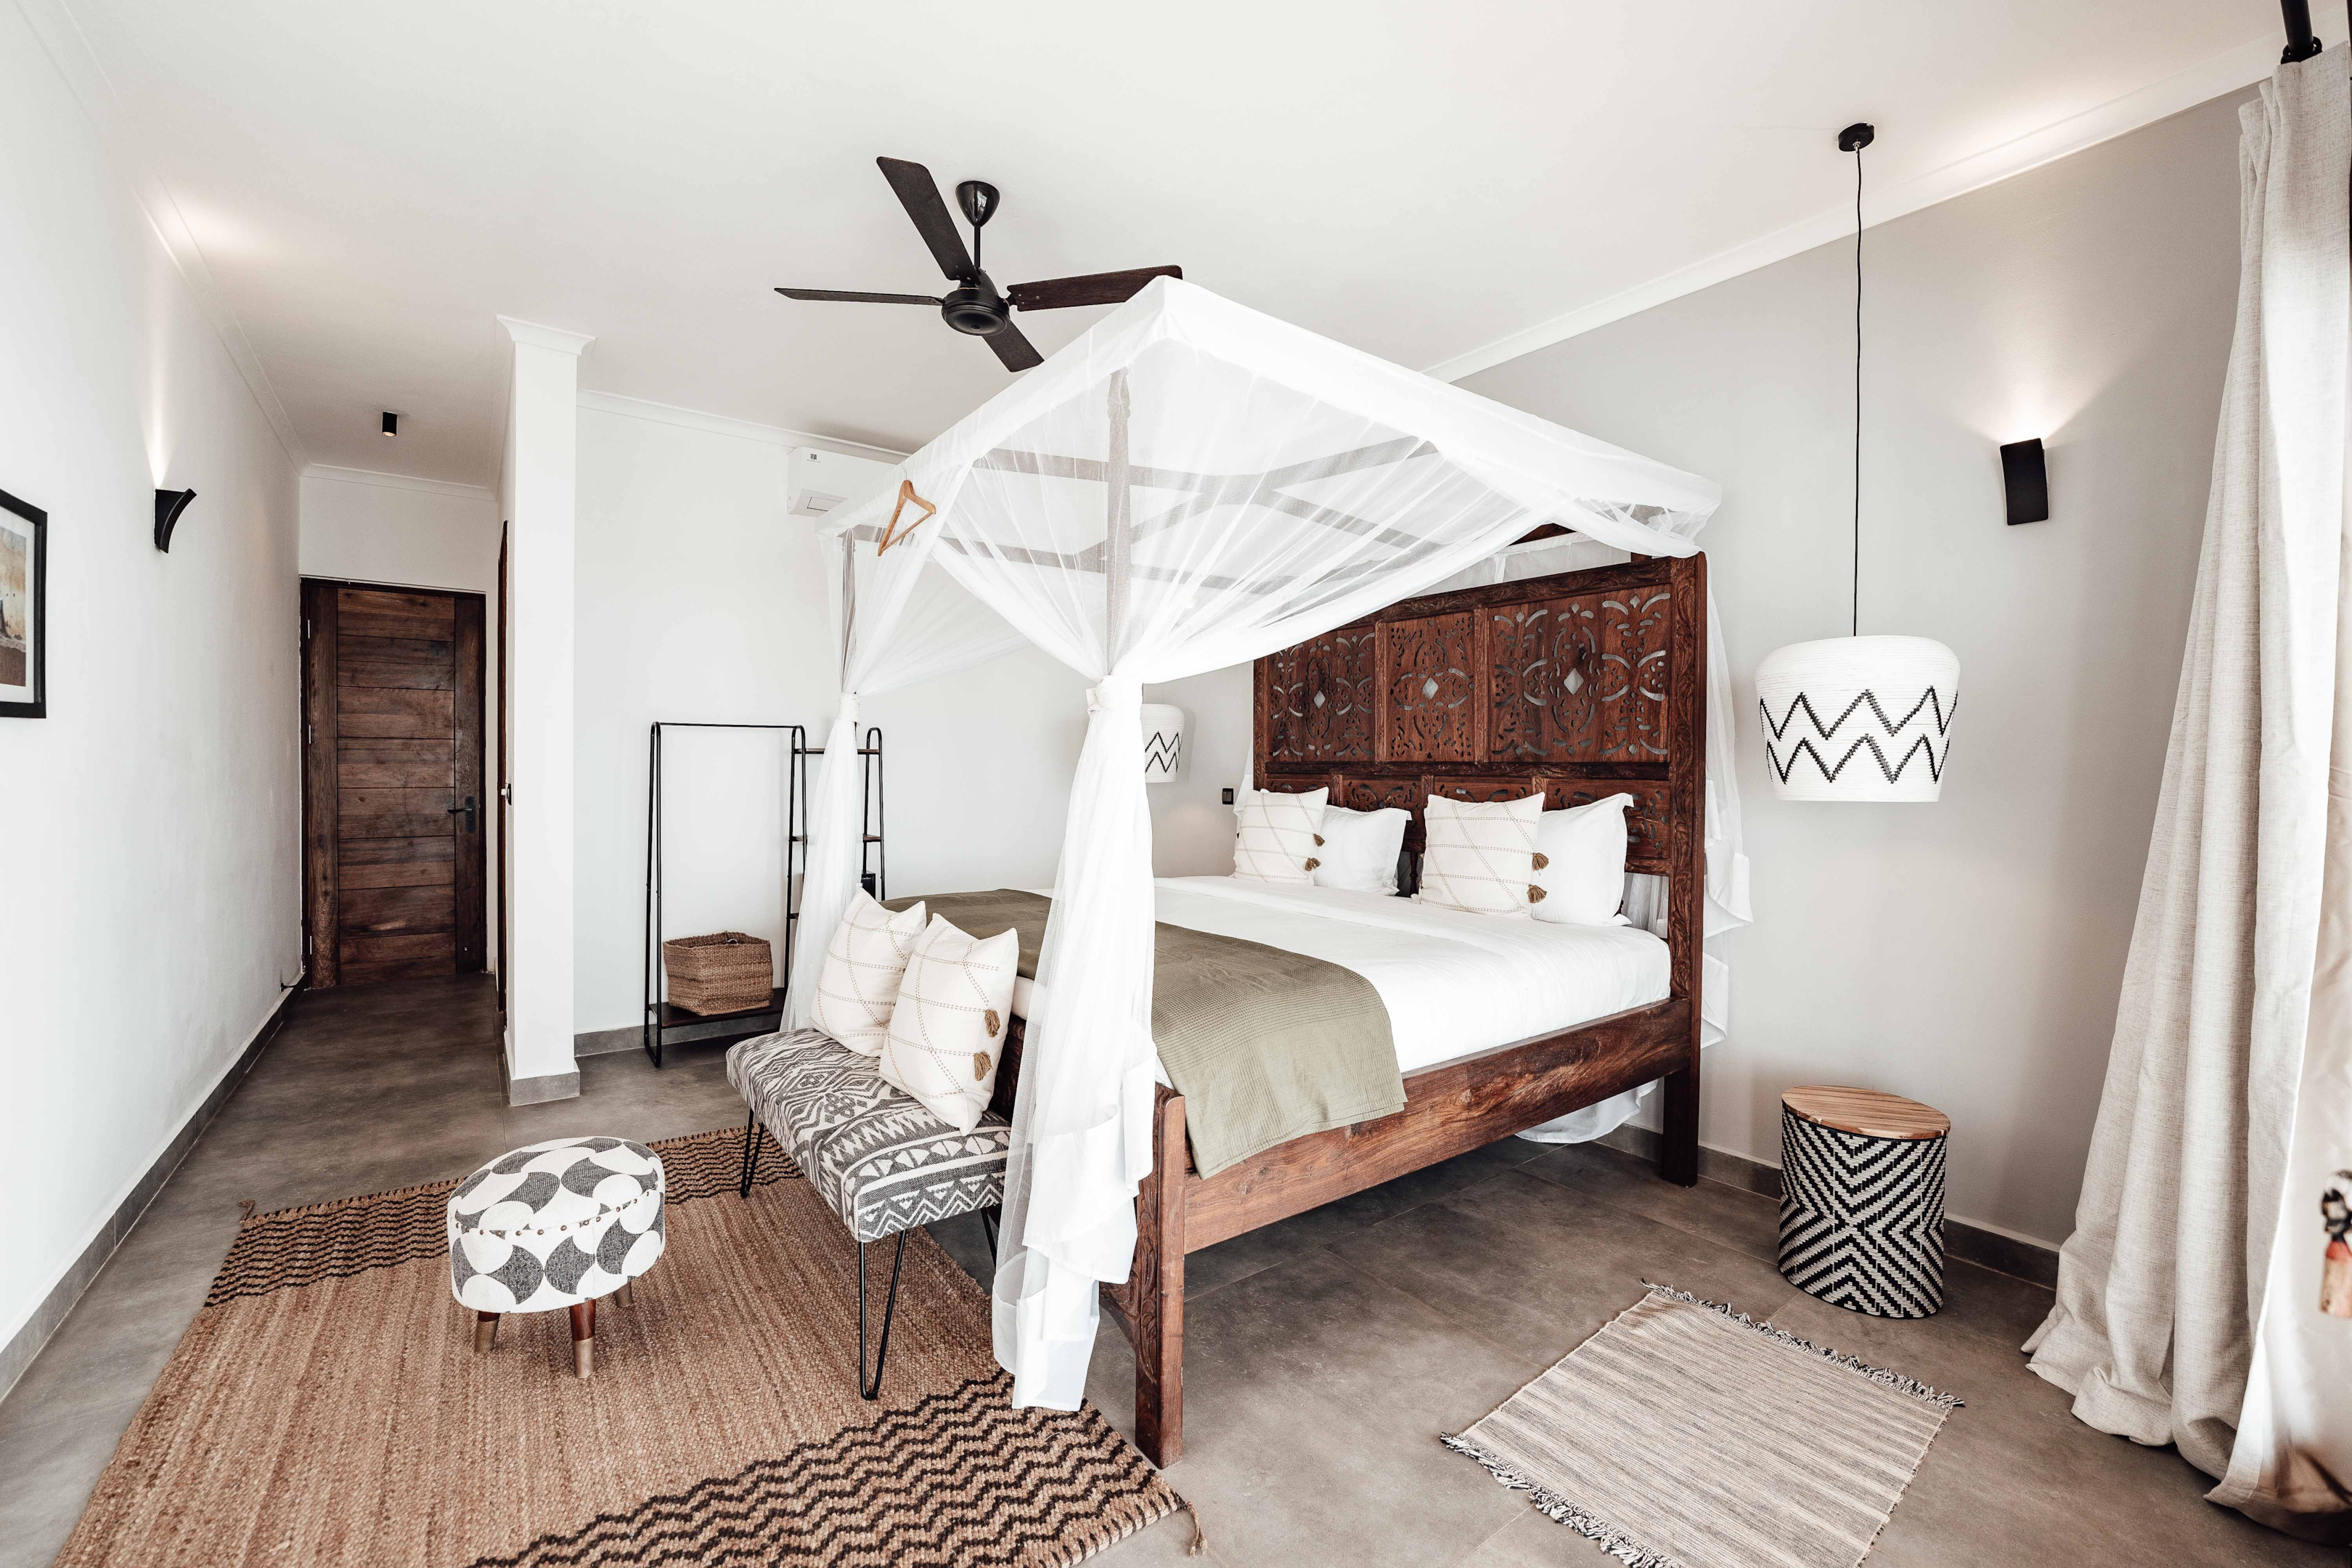 image credit: https://www.pexels.com/photo/wooden-carved-bed-with-white-canopy-and-rugs-in-a-bedroom-12715595/